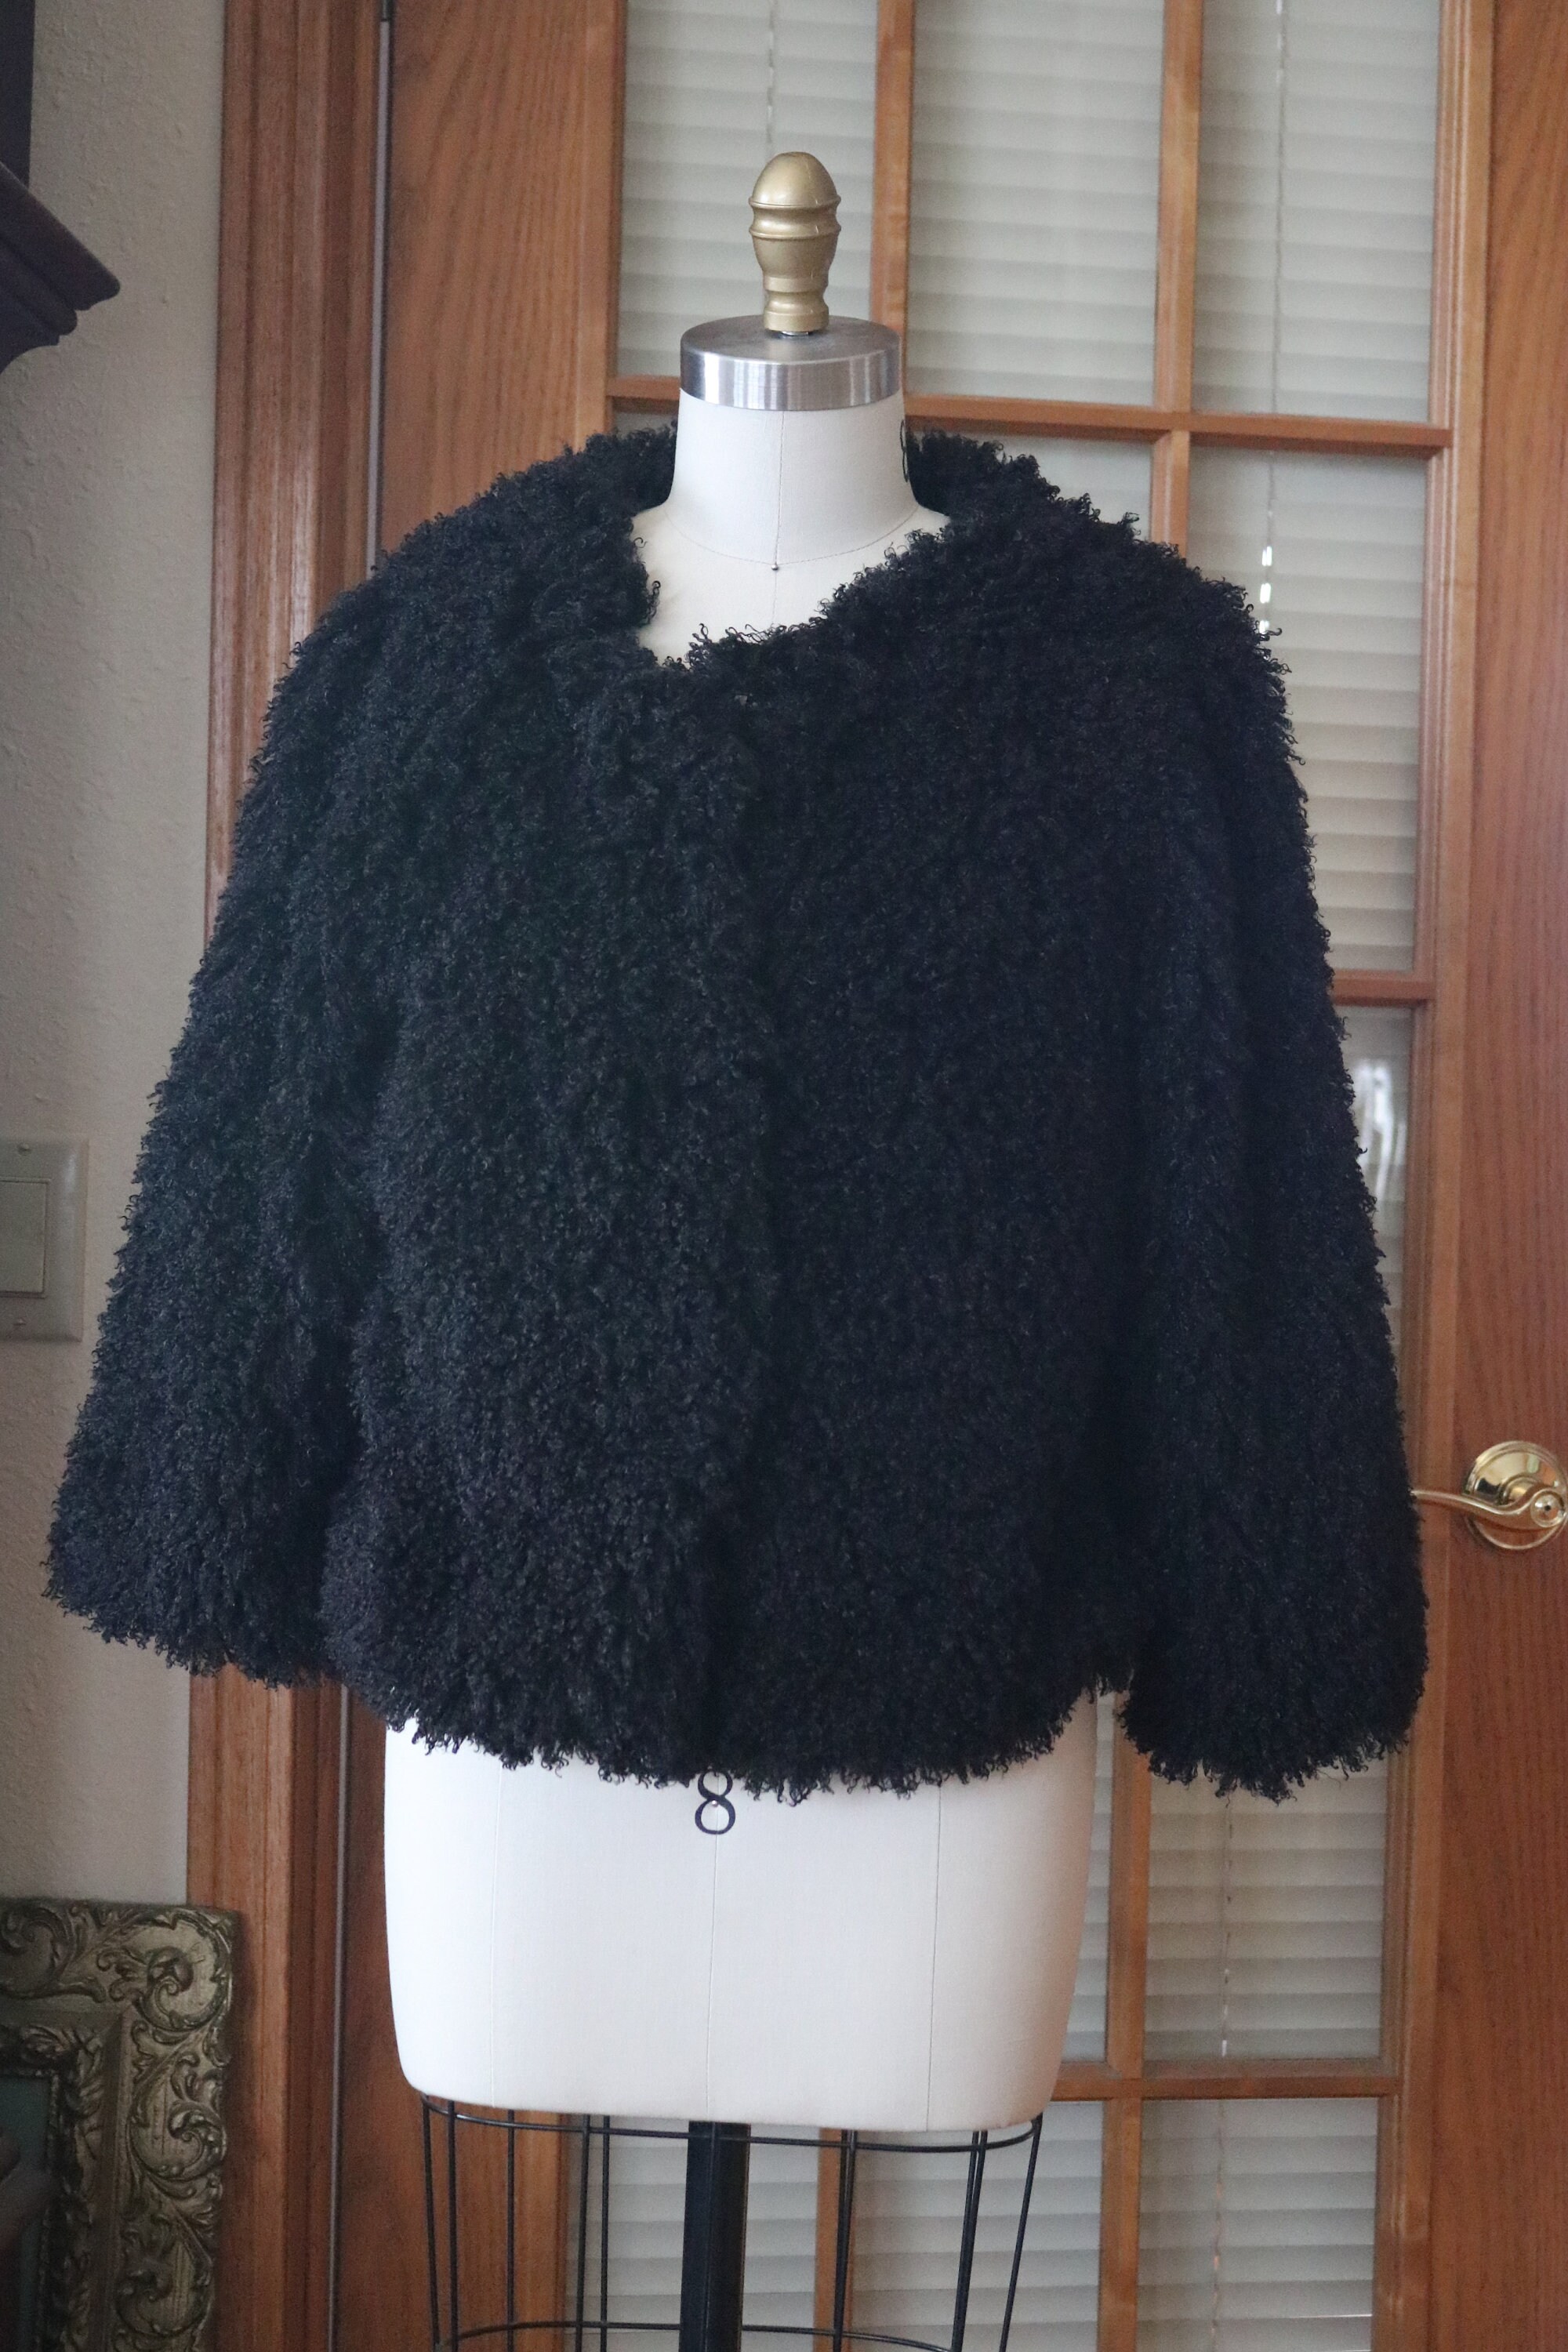 Real Vintage Search Engine Curly Fluffy Chubby Jacket 30S 40S Style Wedding Coat $69.00 AT vintagedancer.com